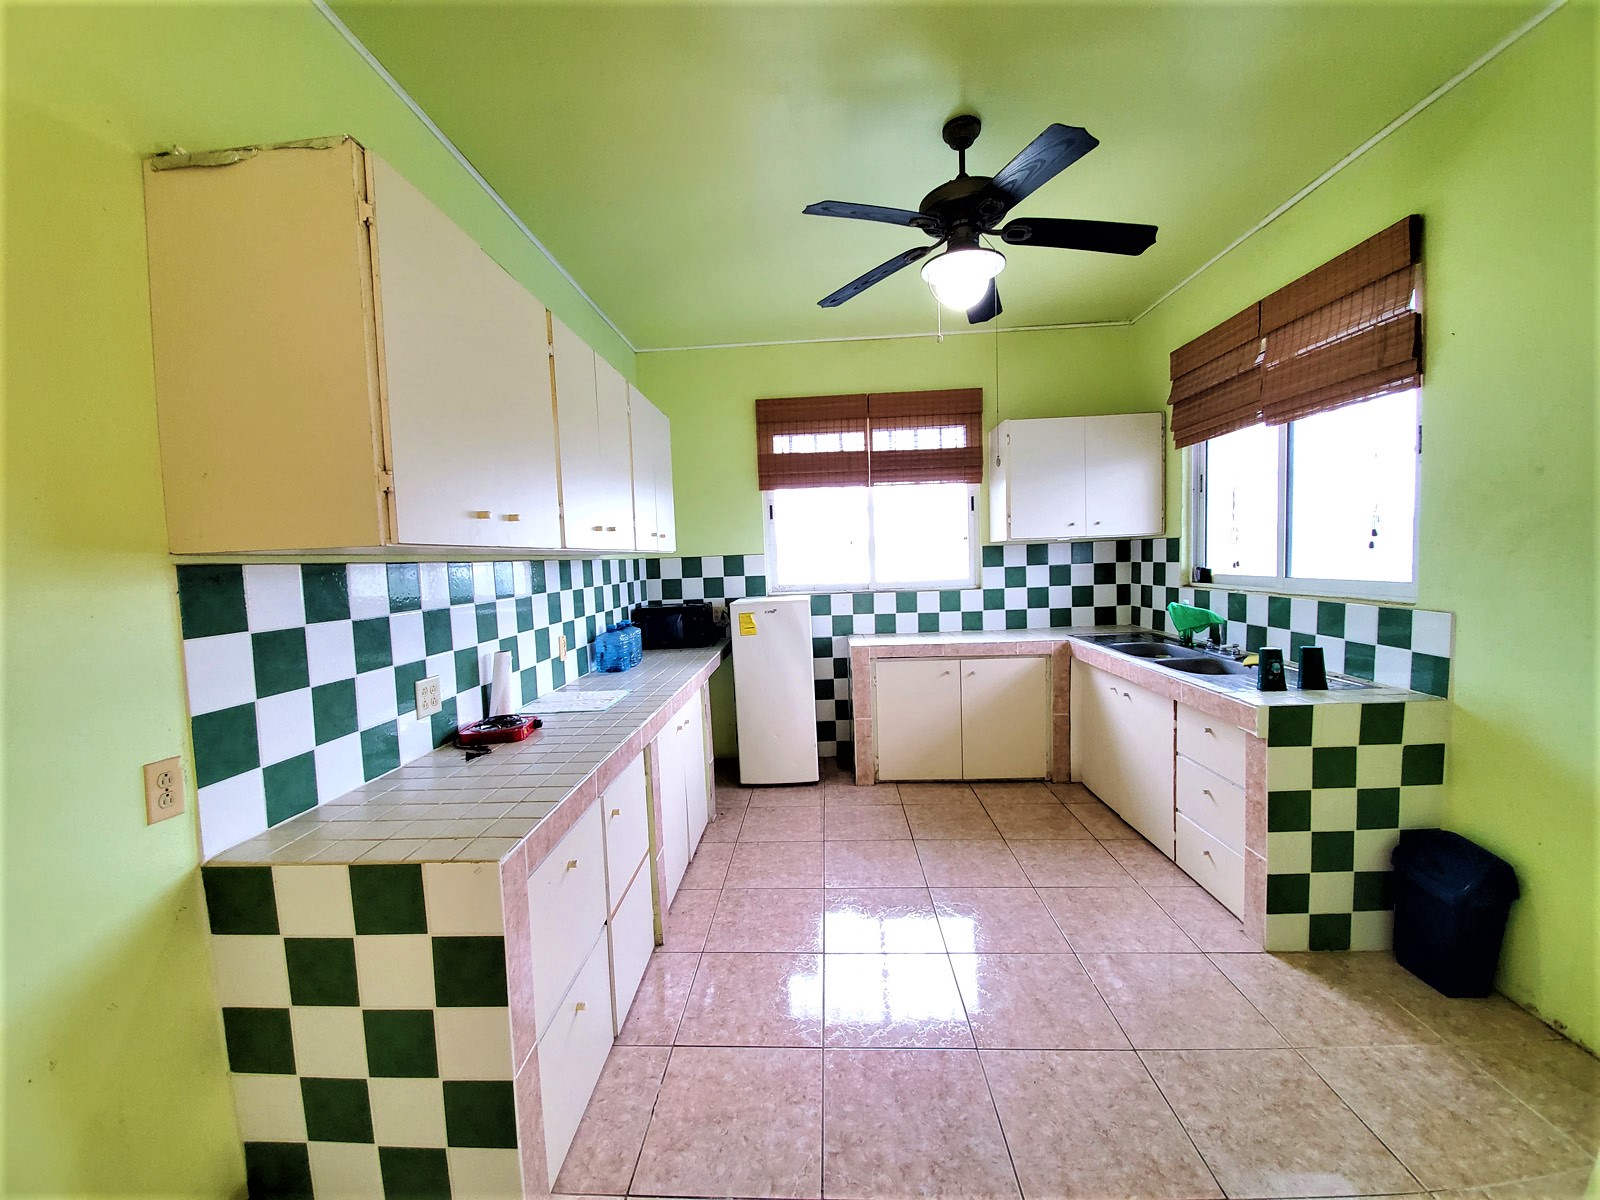 Large and Spacious Four Bedroom House for Rent in Belmopan